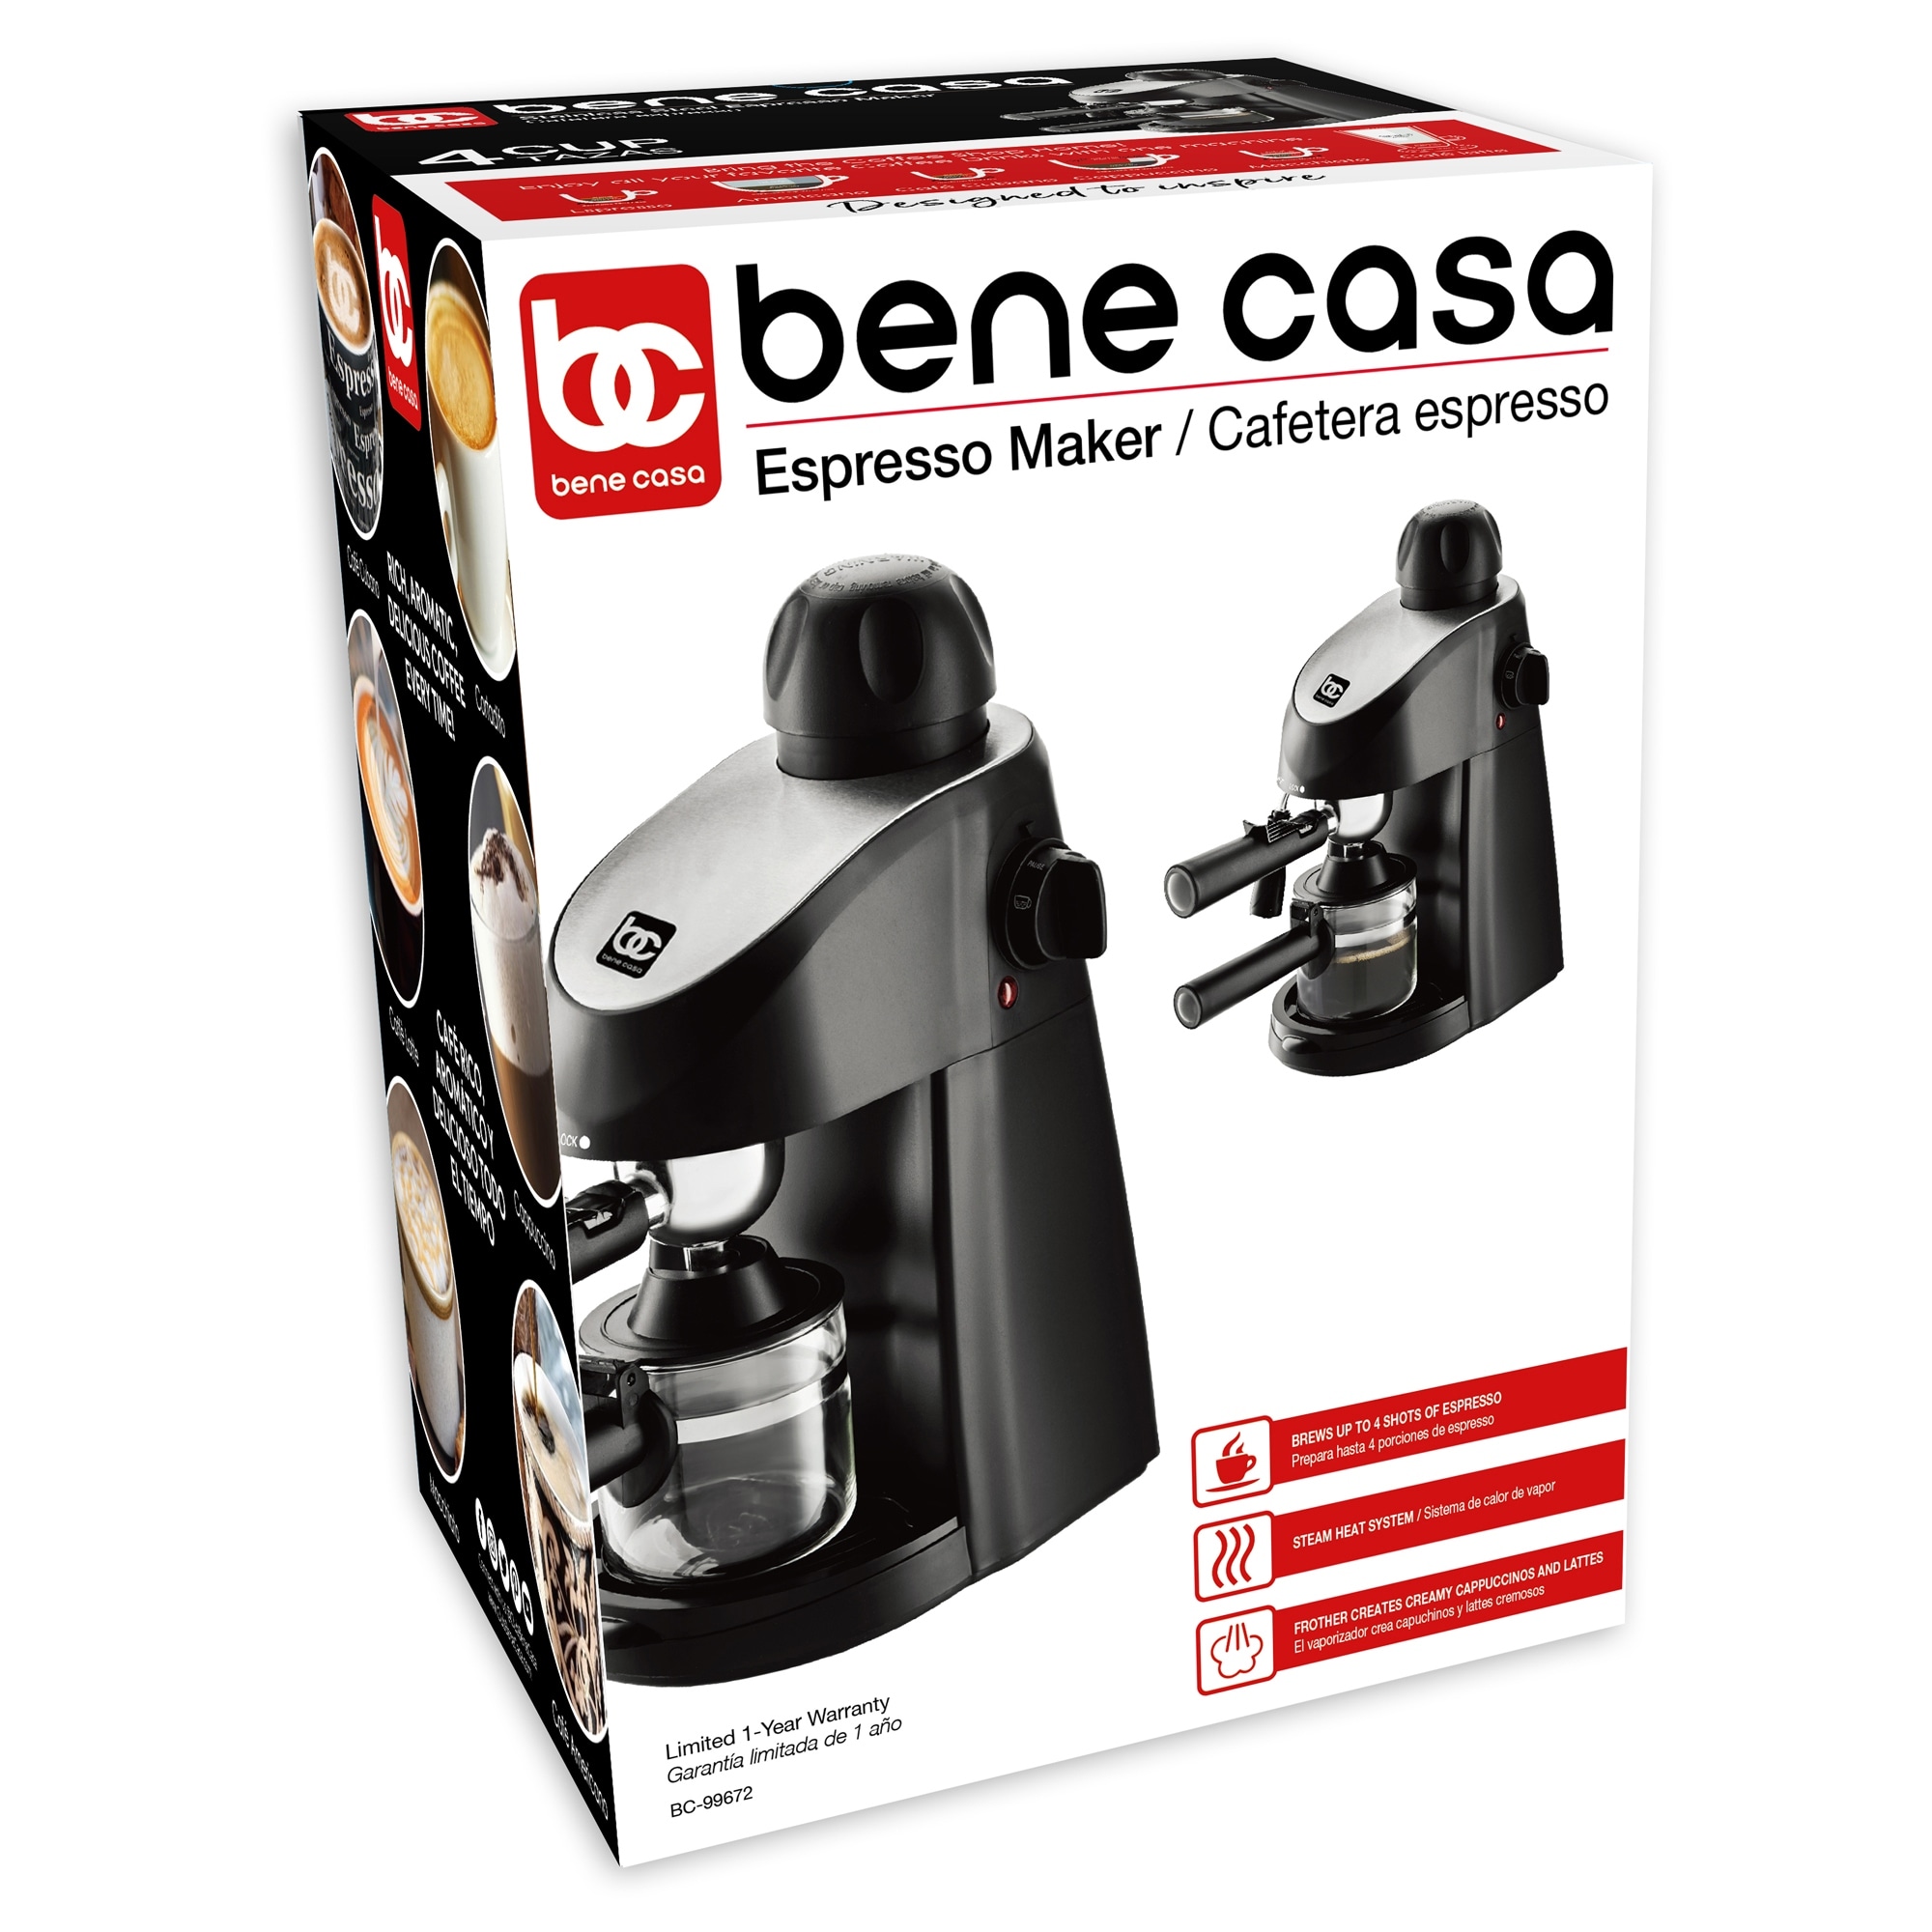 https://ak1.ostkcdn.com/images/products/is/images/direct/9852341be7a6da02b216274eb980fe63418e96f6/Bene-Casa-4-cup-espresso-maker%2C-black%2C-milk-frother%2C-glass-carafe-coffee-maker.jpg